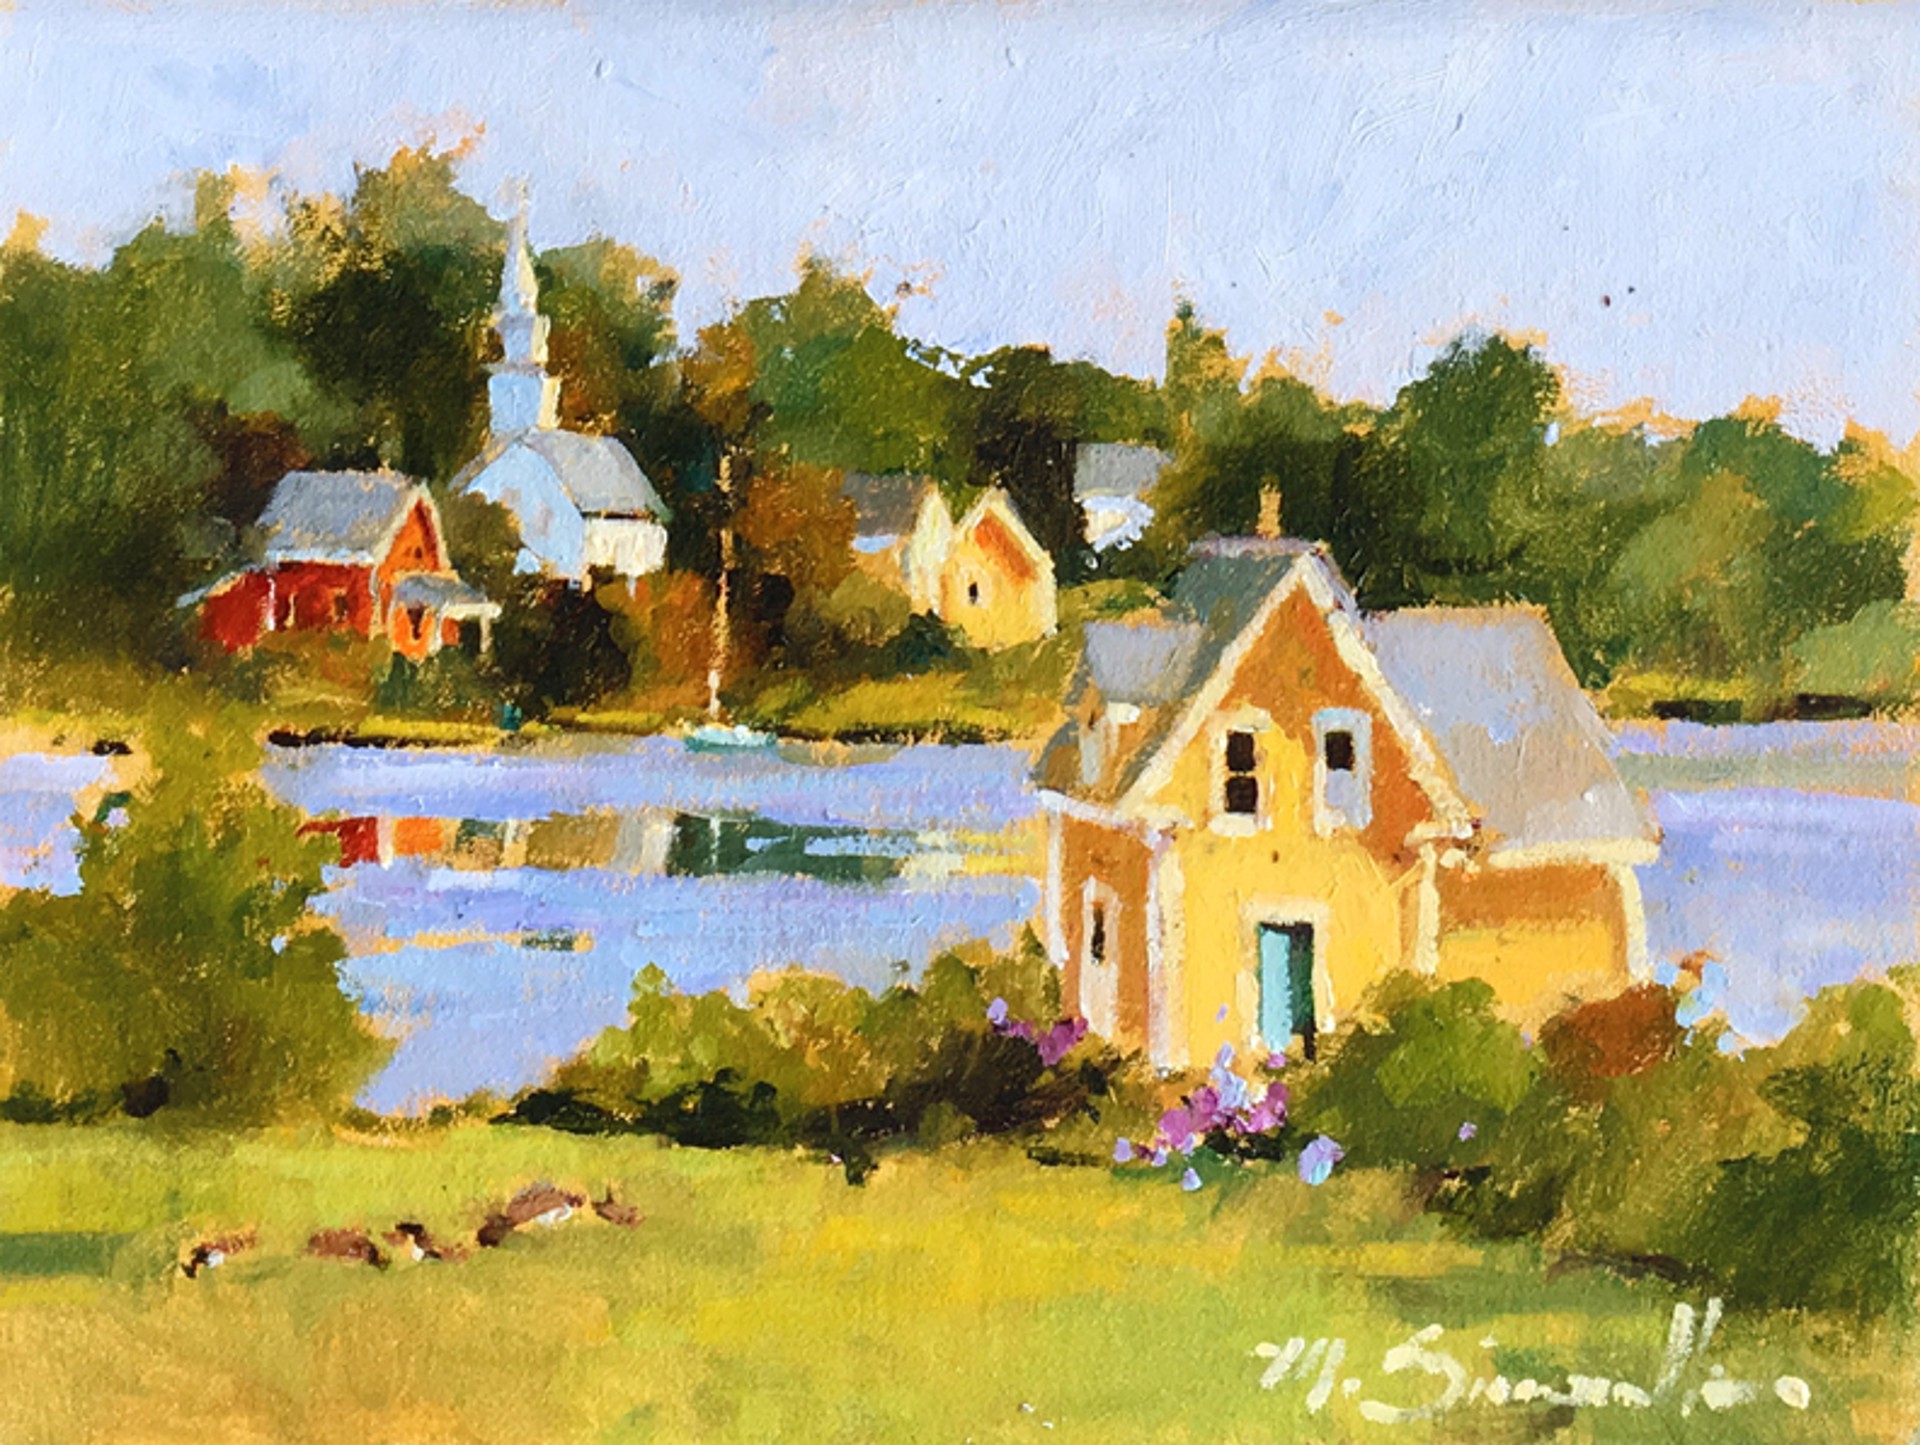 Wiscasset, Maine by Marilyn Simandle